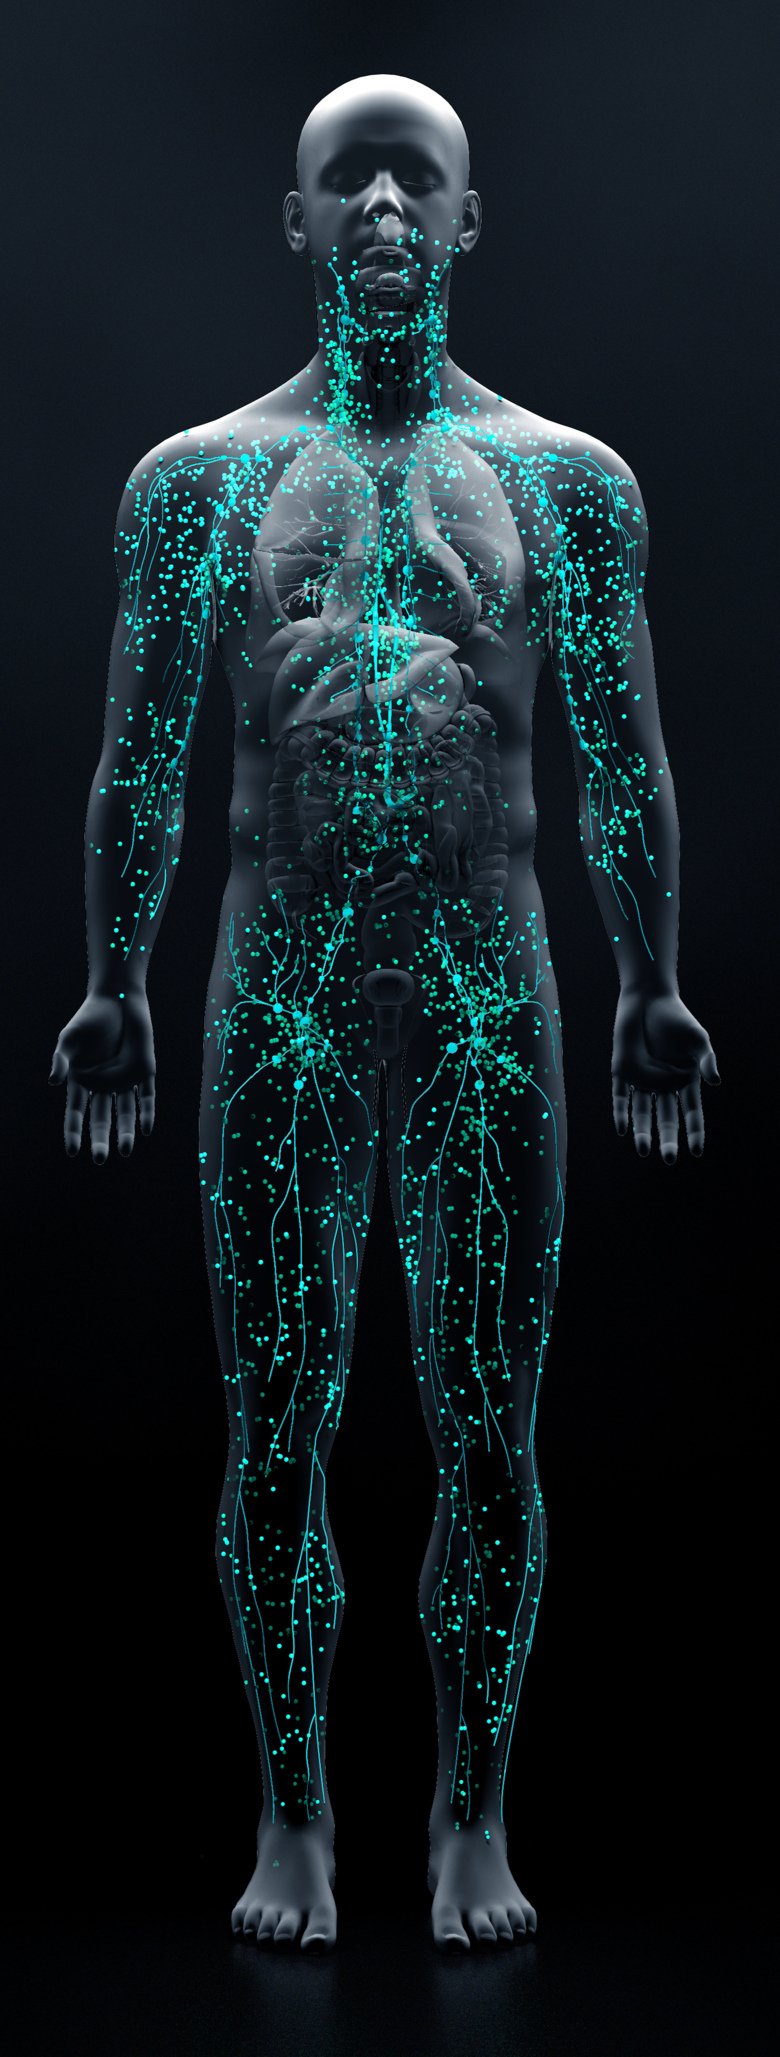 Illustration of neuronal networks and other signal pathways in a human body.